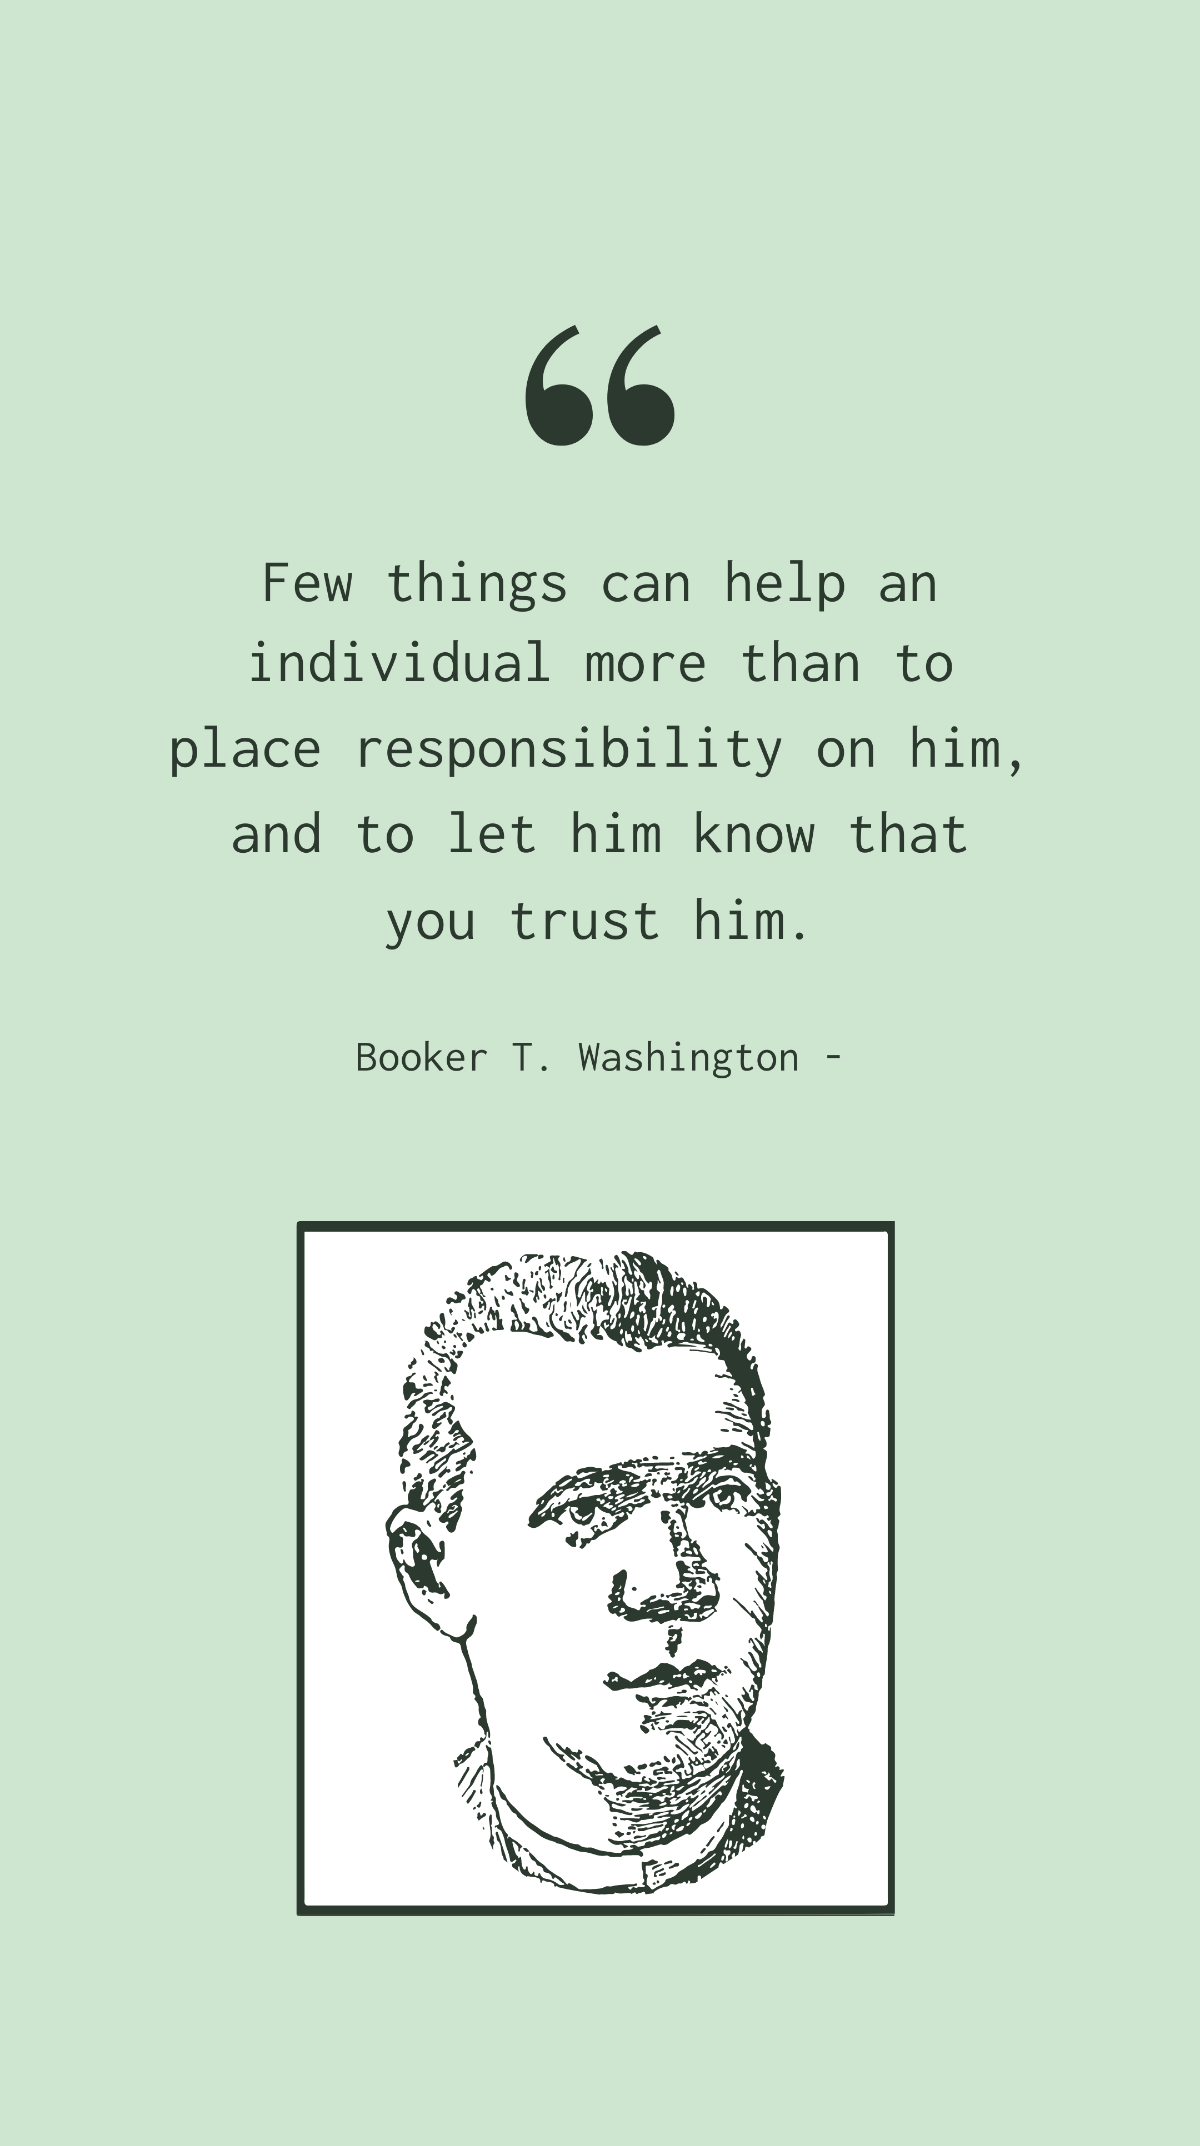 Booker T. Washington - Few things can help an individual more than to place responsibility on him, and to let him know that you trust him. Template